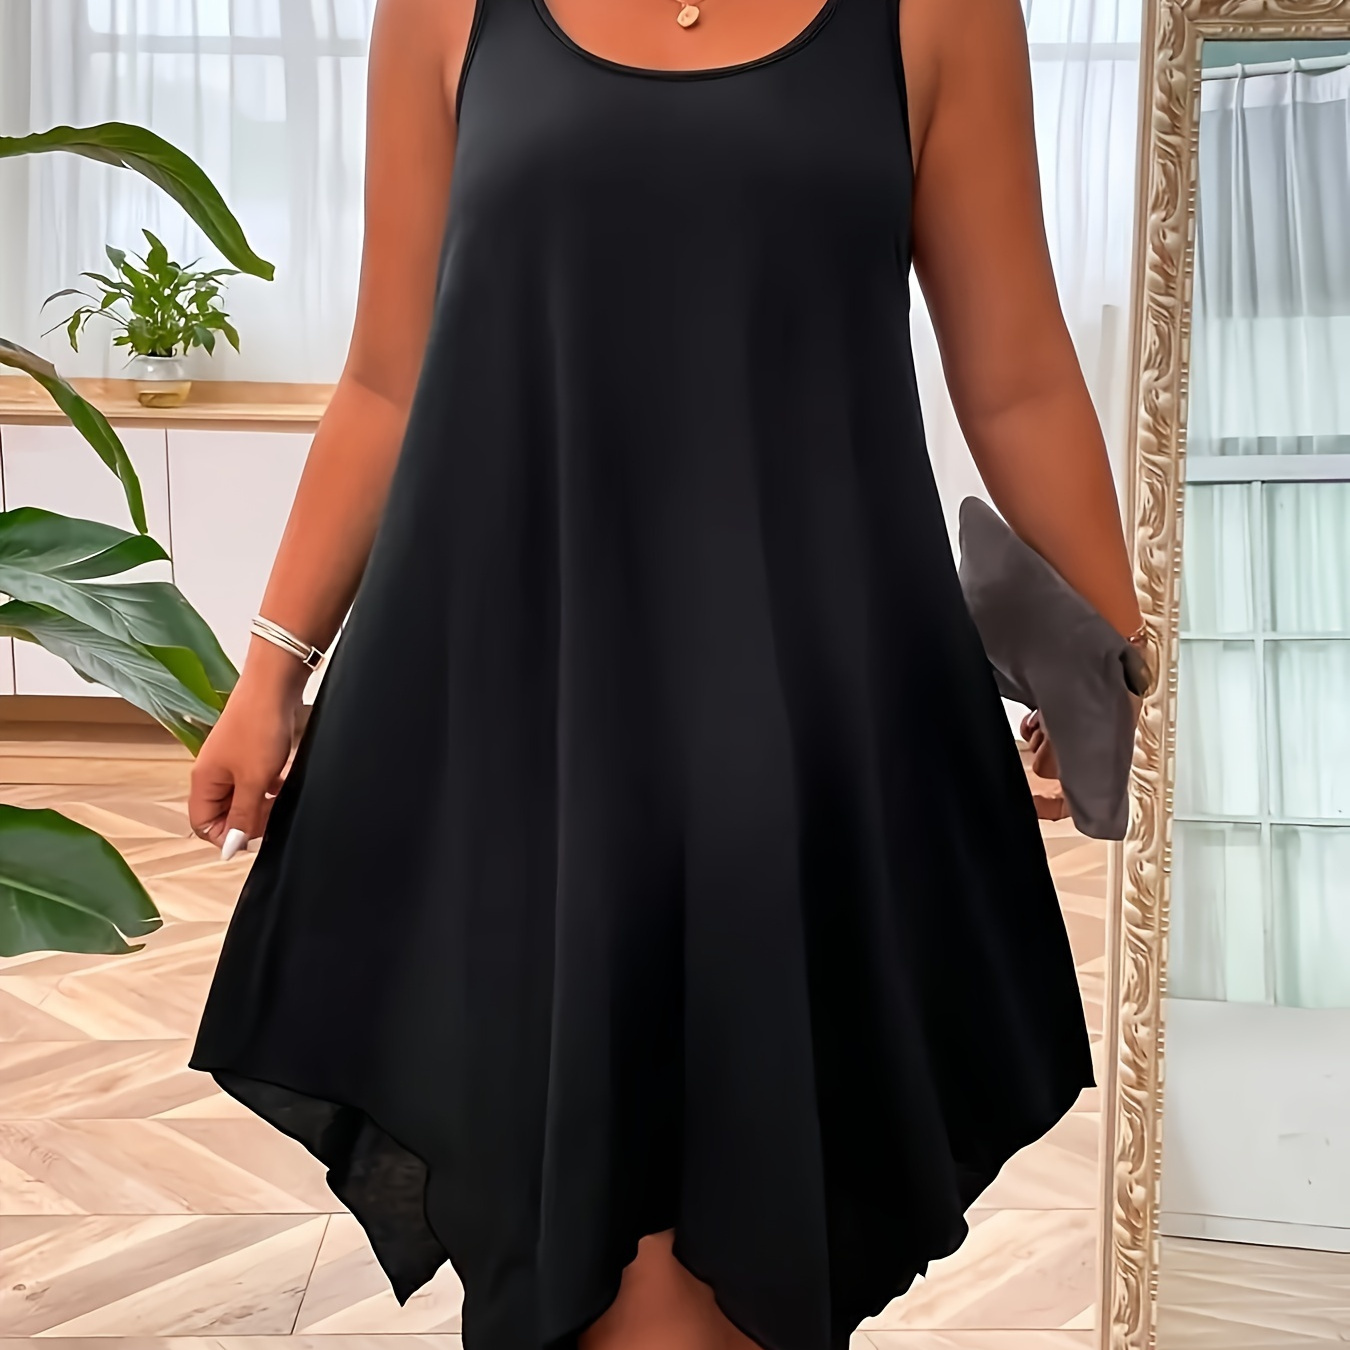 

Plus Size Solid Color Cami Dress, Vacation Style Asymmetrical Hem Sleeveless Crew Neck Dress For Spring & Summer, Women's Plus Size Clothing